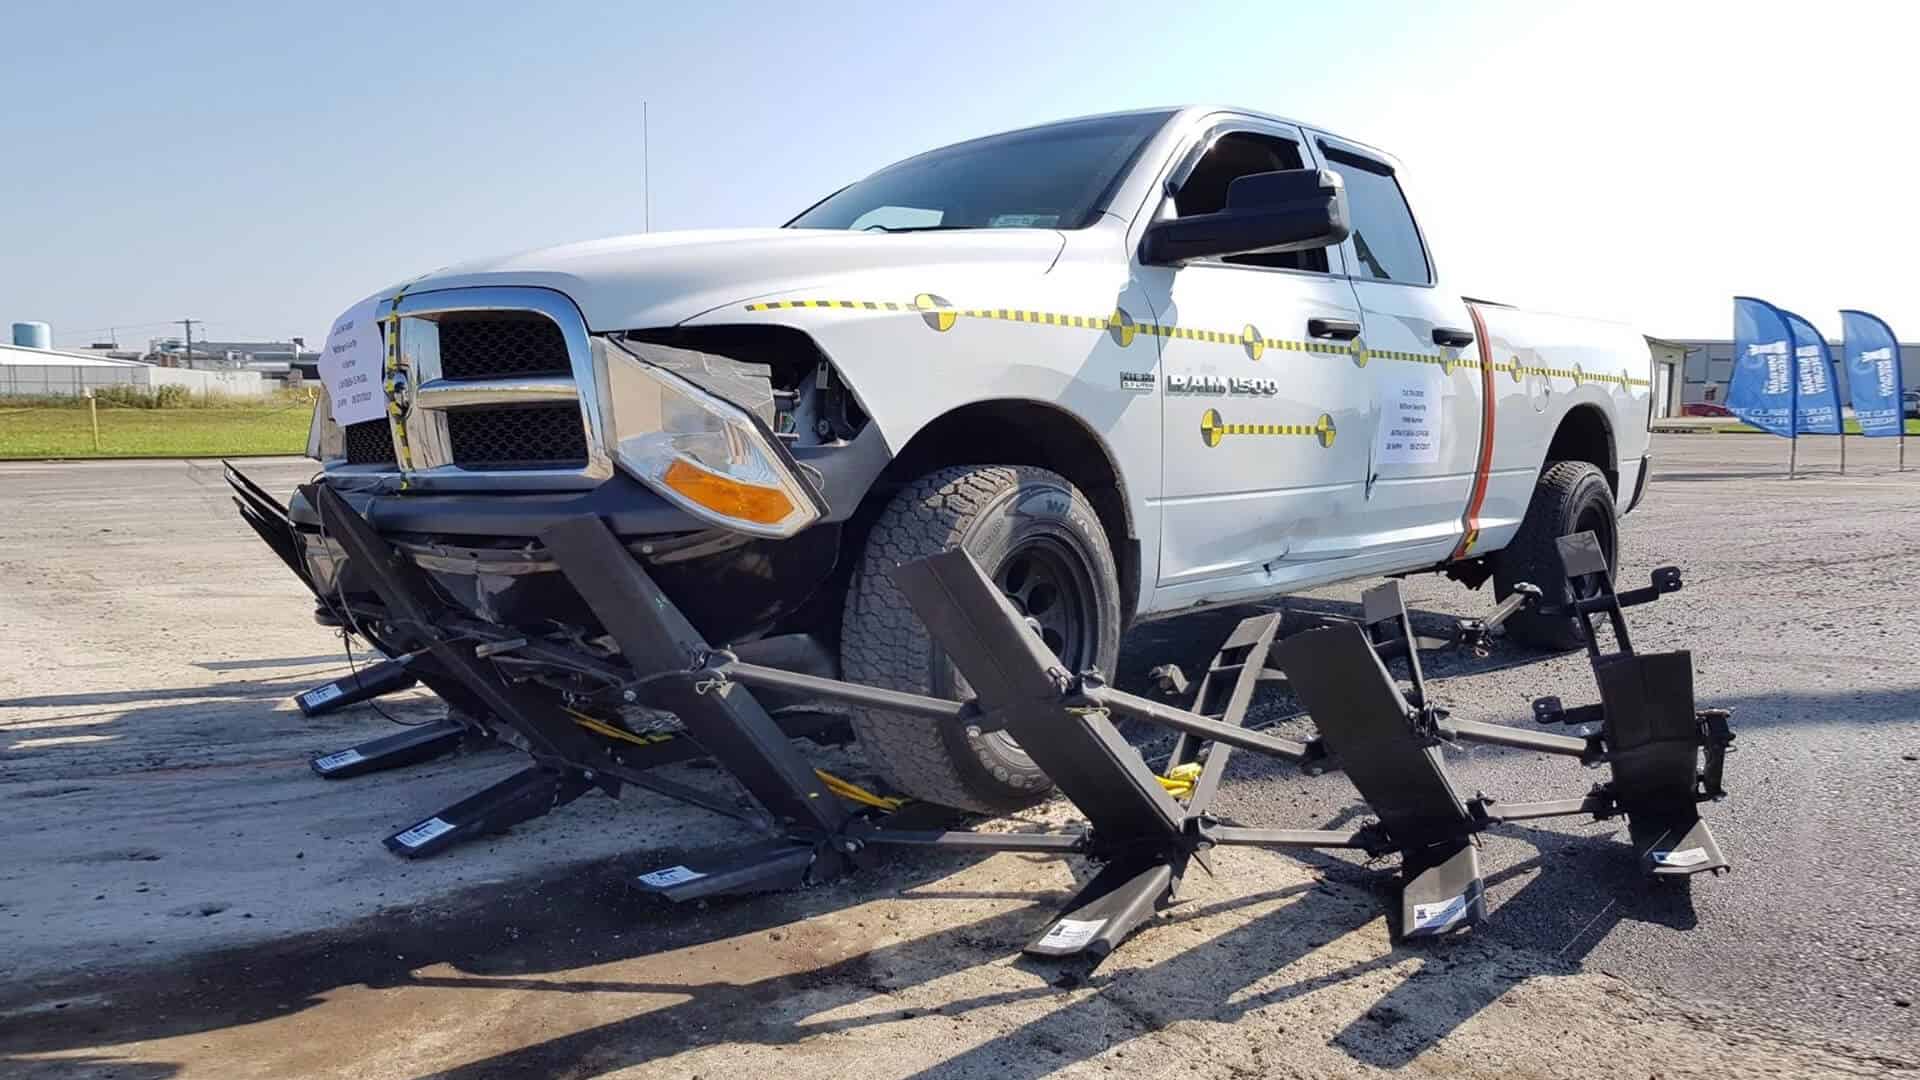 FMB stopping a pickup truck during testing pahse